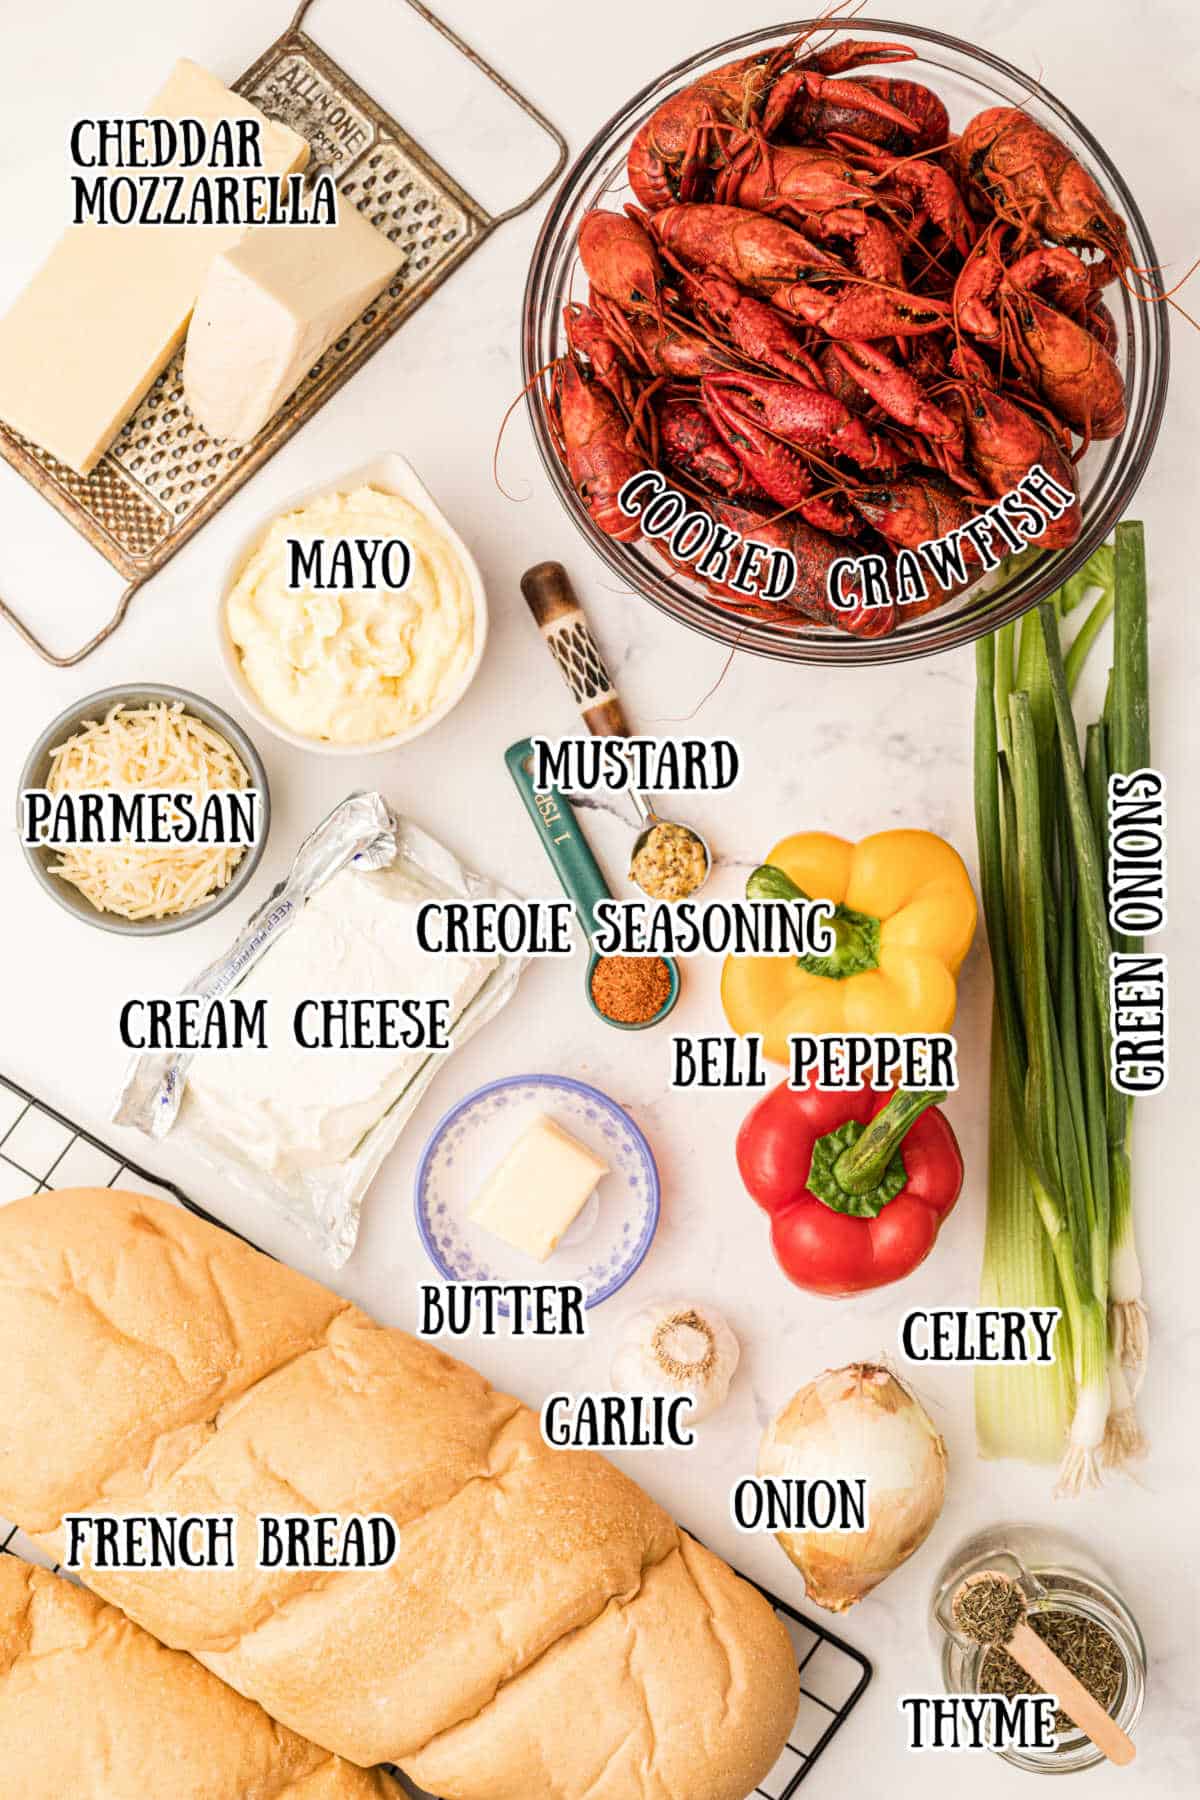 ingredients all laid out for a crawfish bread recipe